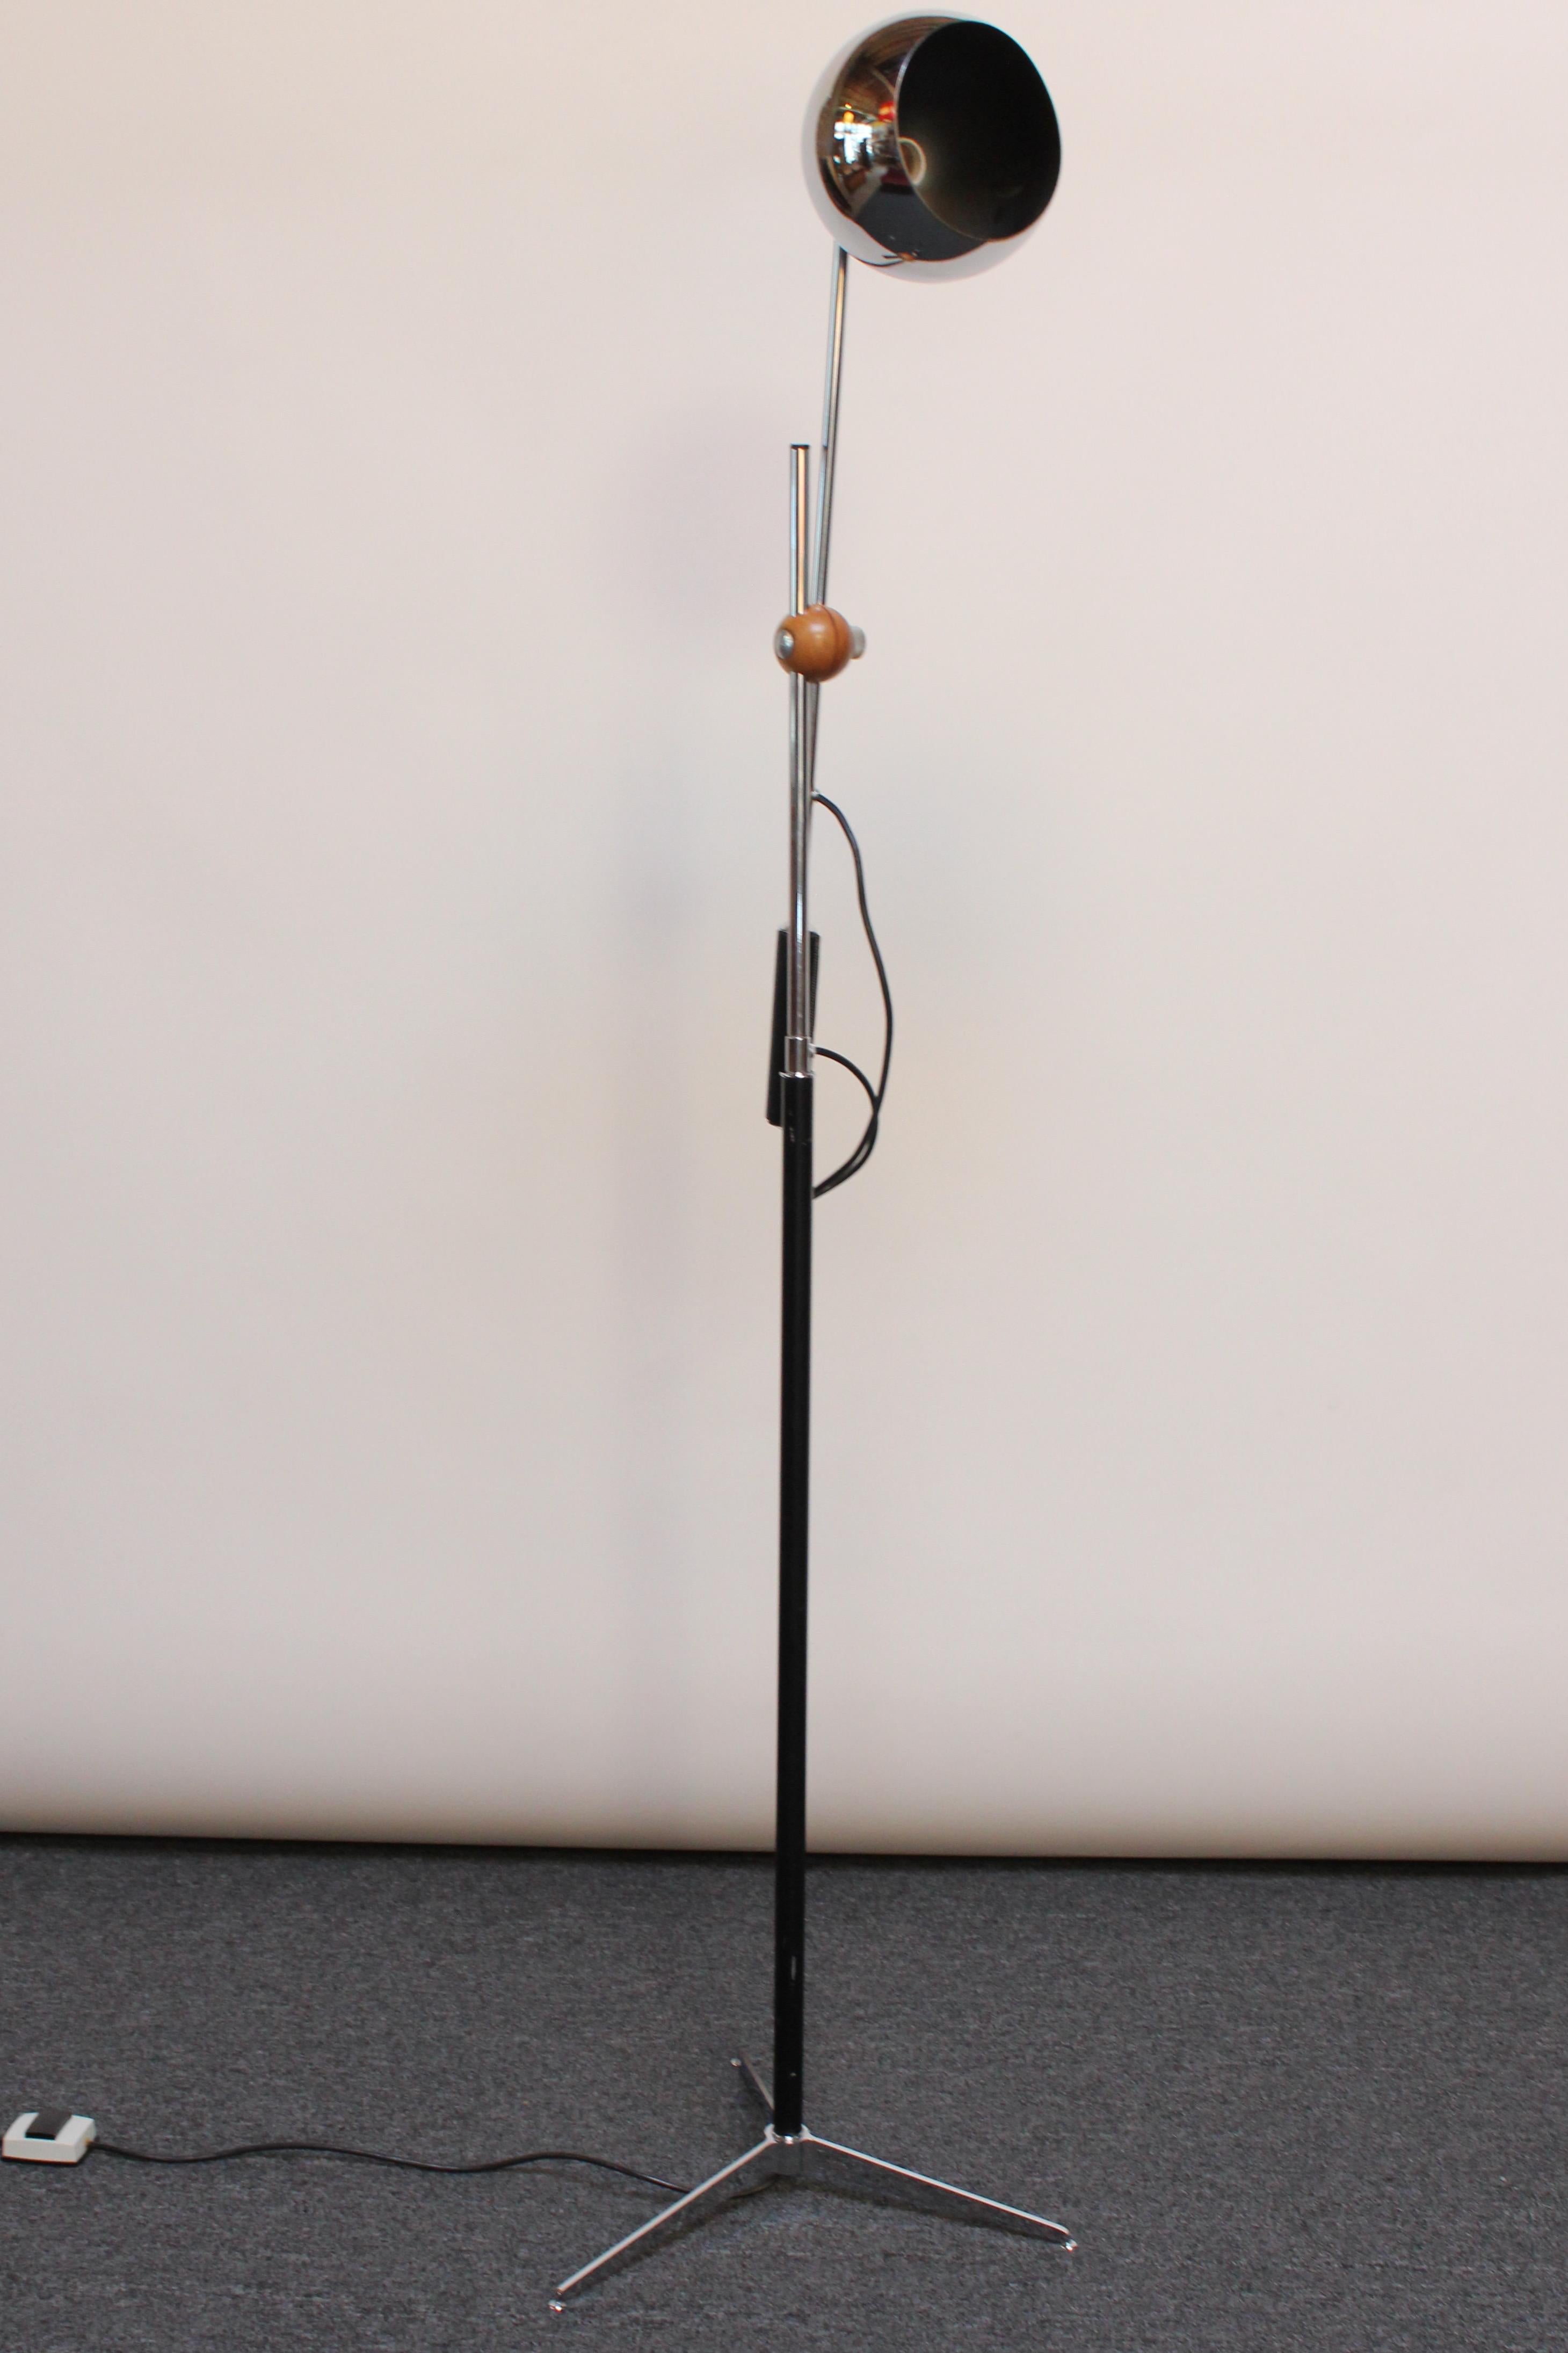 Chrome floor lamp manufactured in the 1960s by Arteluce. 
Composed of a single, counterbalanced arm with an adjustable globe shade and leather wrapped handle, all supported by a black enameled shaft and tripod base. 
The plastic clasp has been